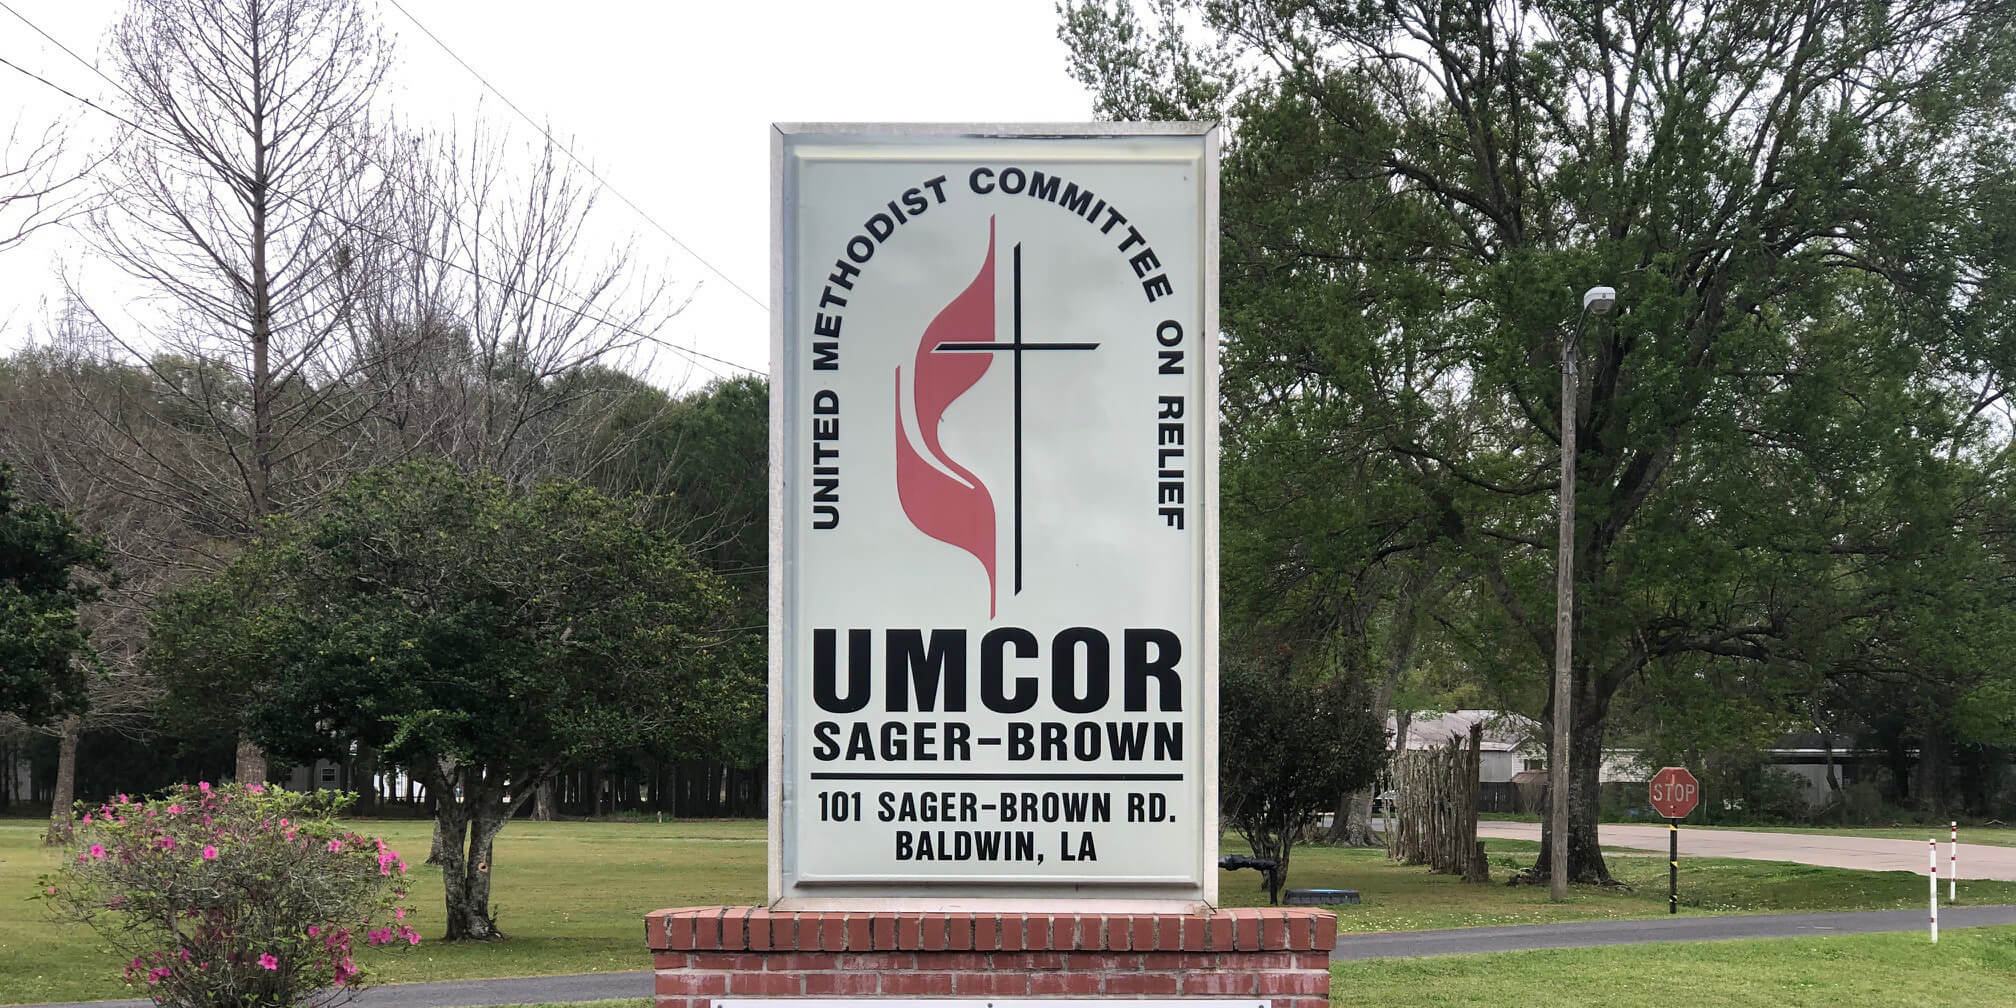 UMCOR Sager Brown Depot to welcome volunteers again